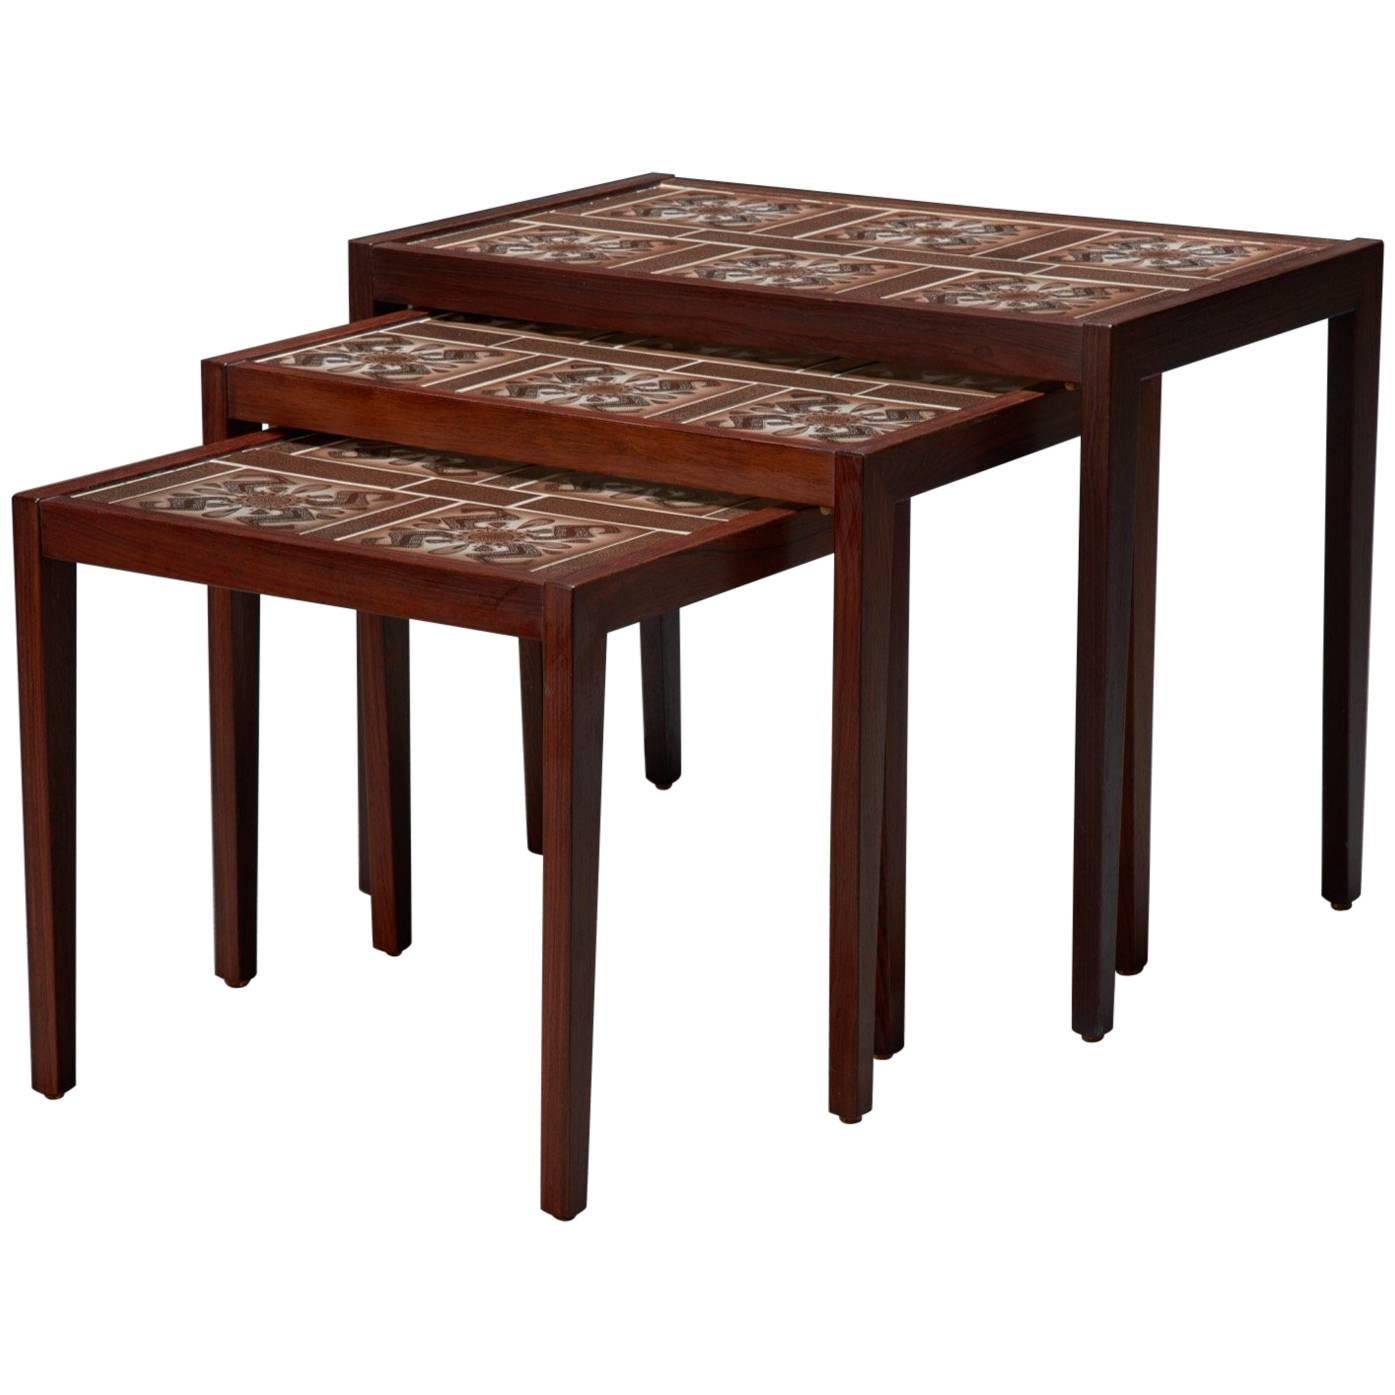 Set of Three Rosewood and Tile Danish Modern Nesting Tables